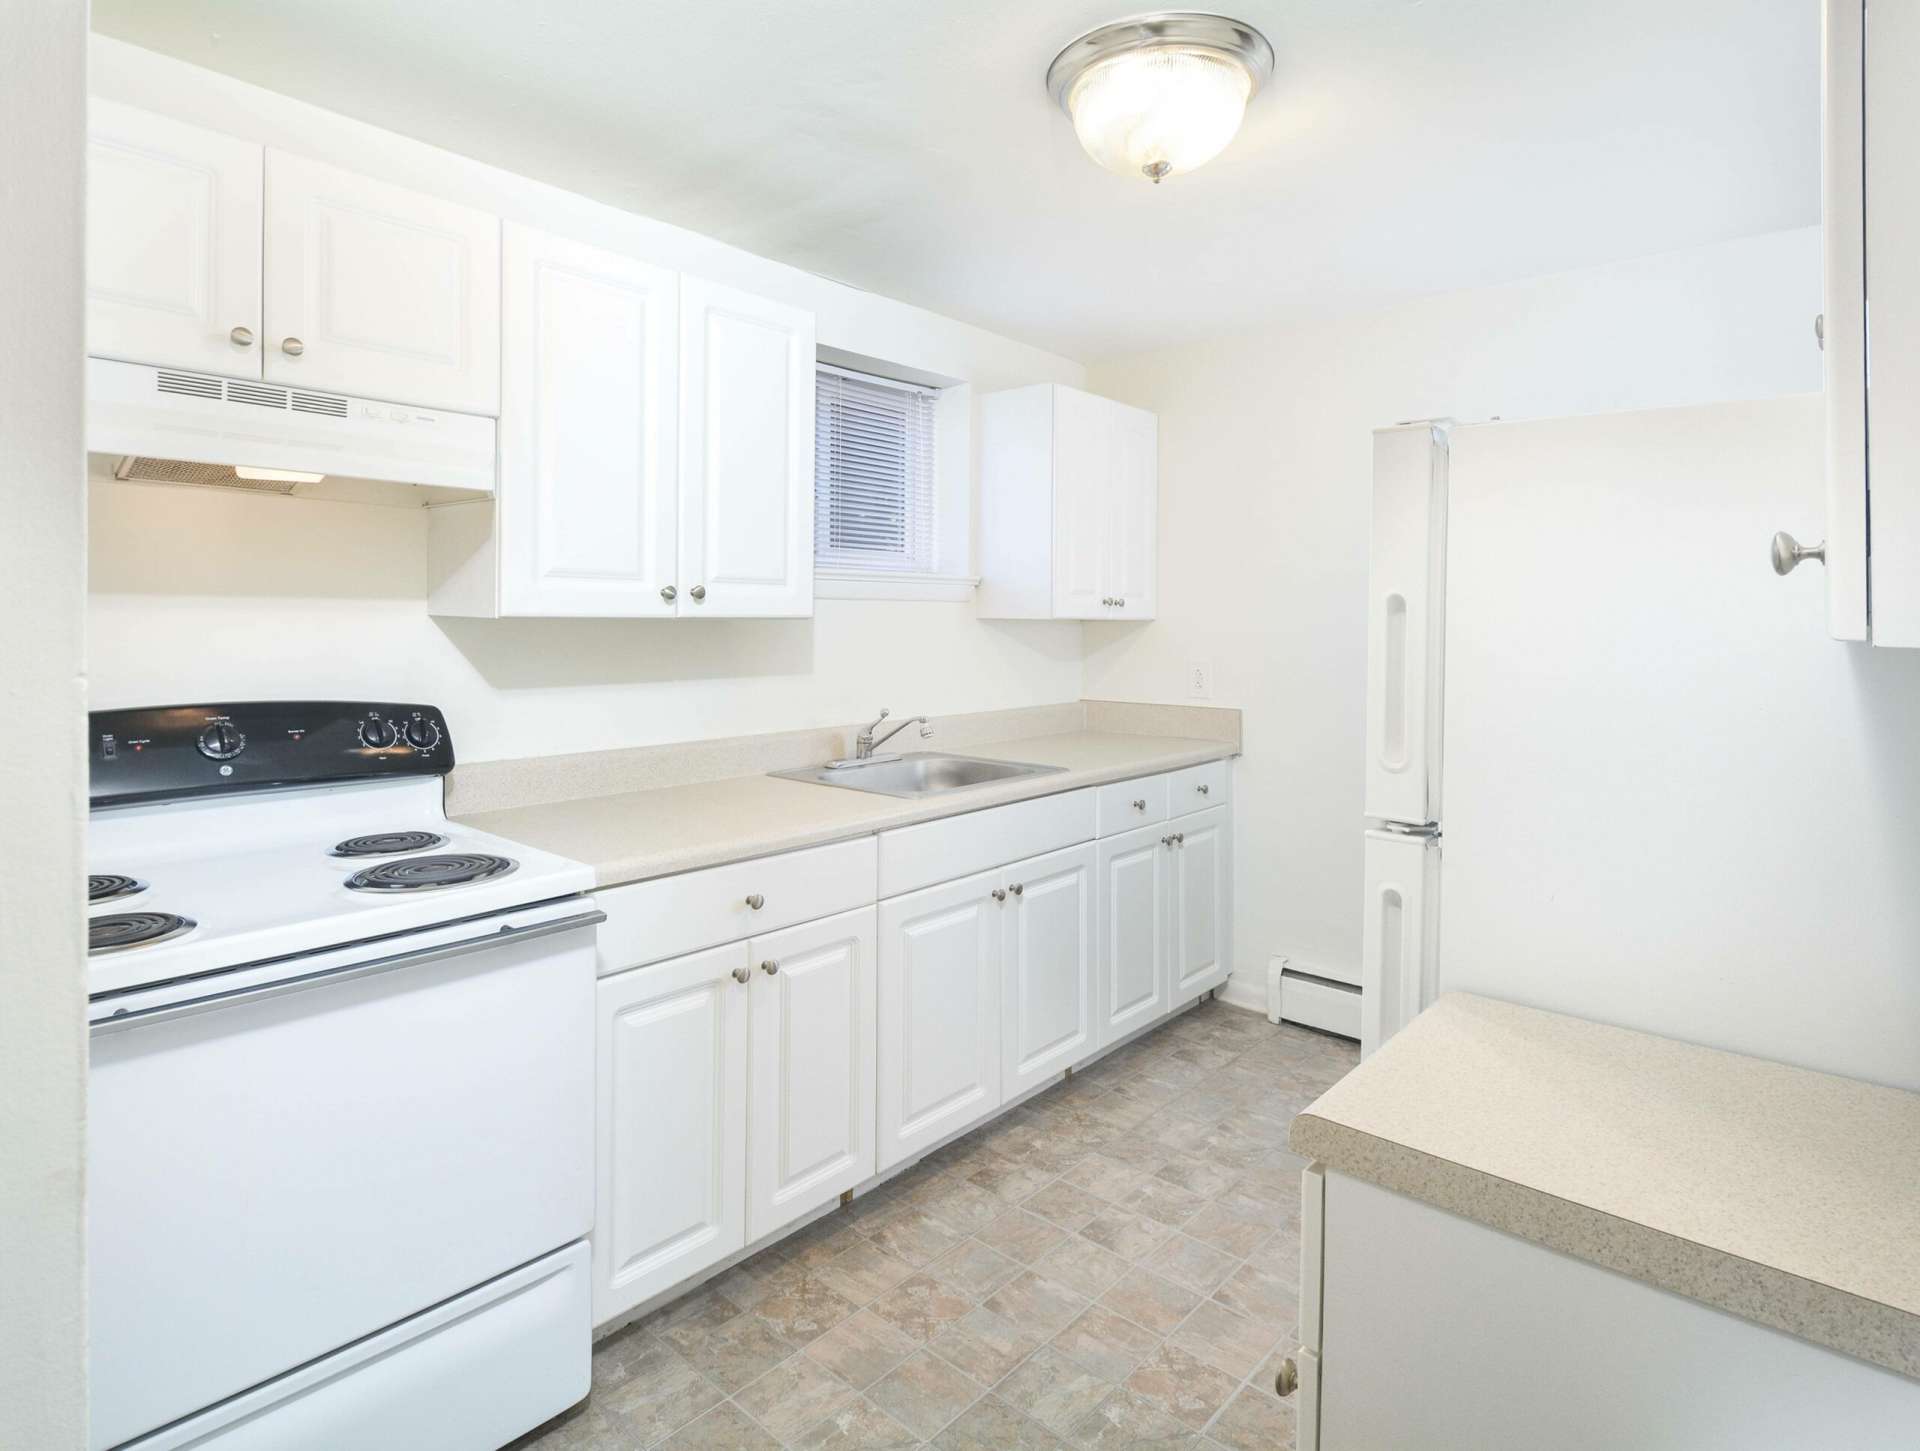 Kitchen area with white appliances, white cabinets, and a ceiling light.